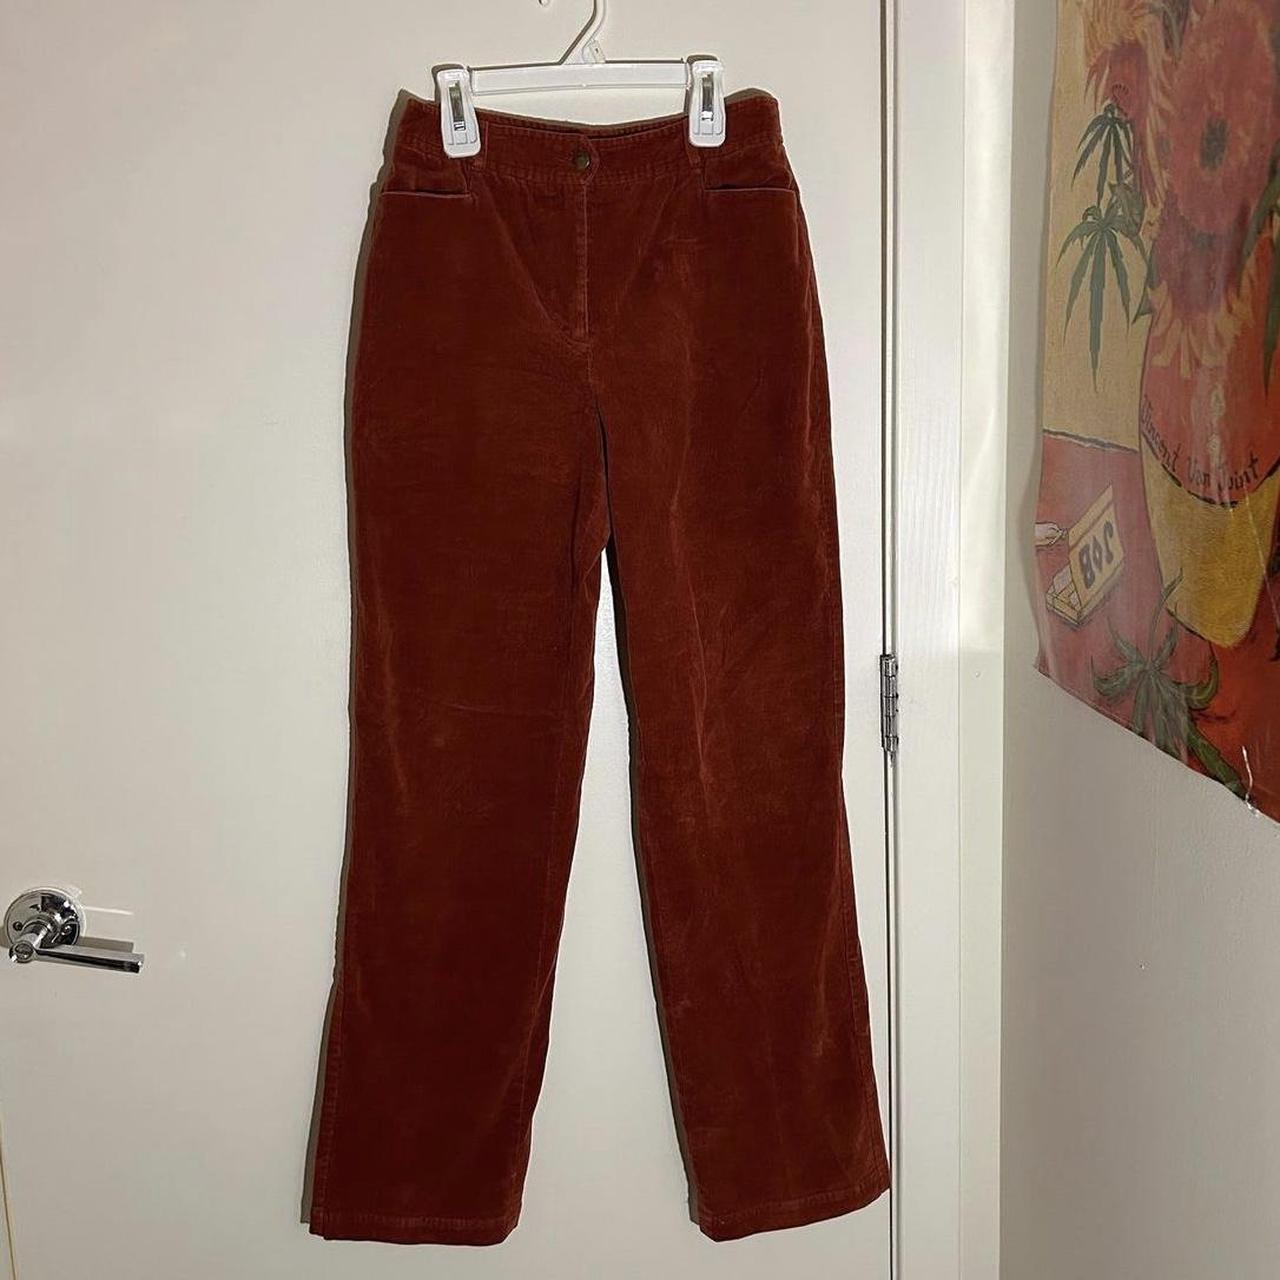 Oalirro Cargo Pants Women Baggy Straight Low Waisted Orange Trousers with  Pockets M - Walmart.com